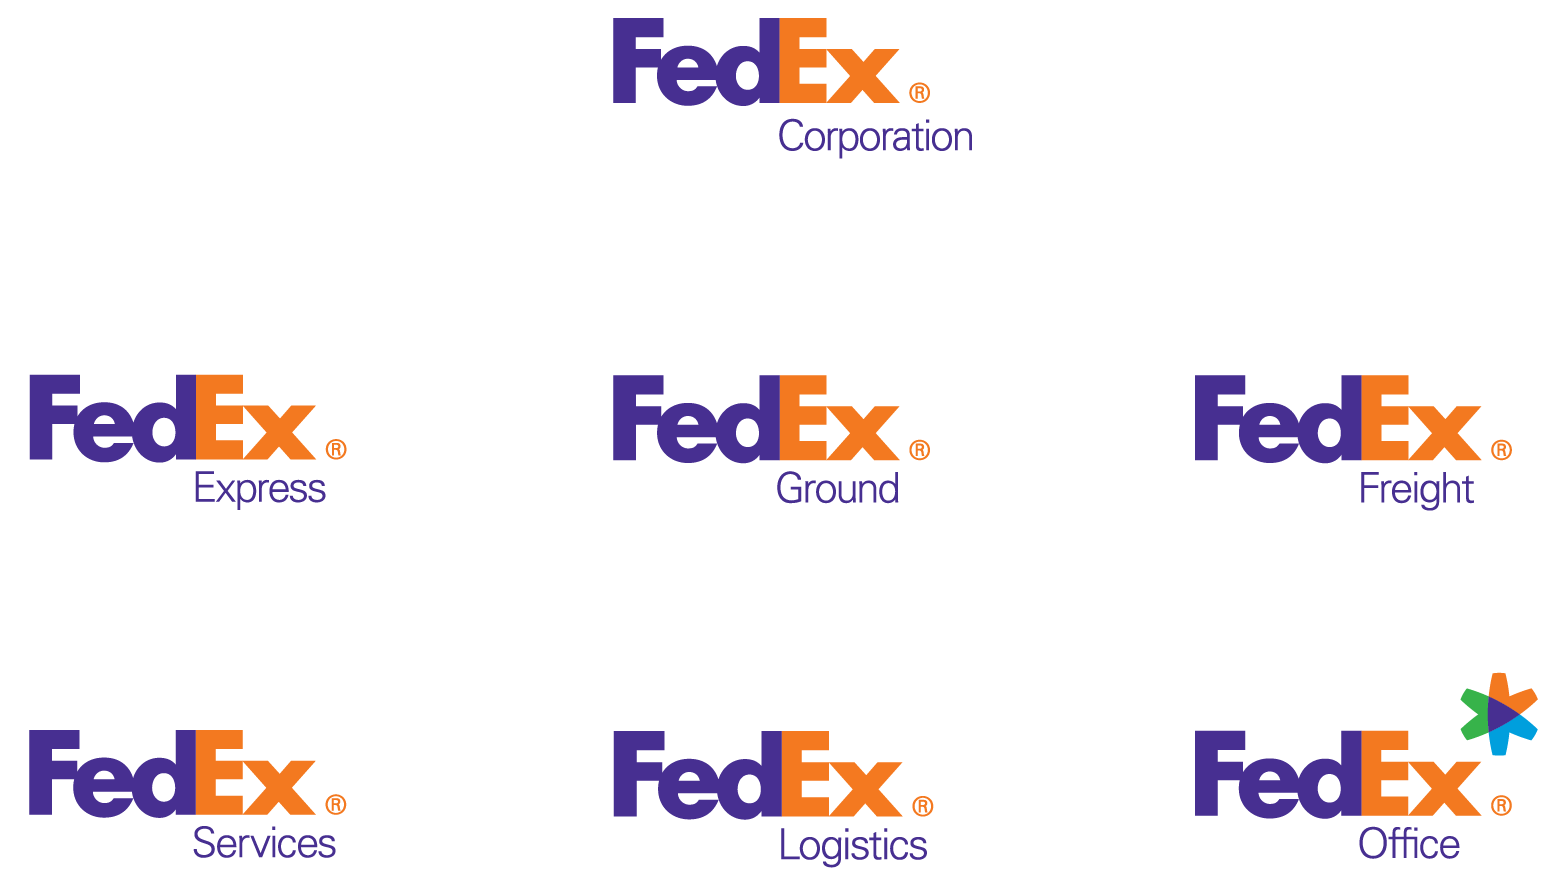 FedEx Corp Logo - Company Structure and Facts - About FedEx